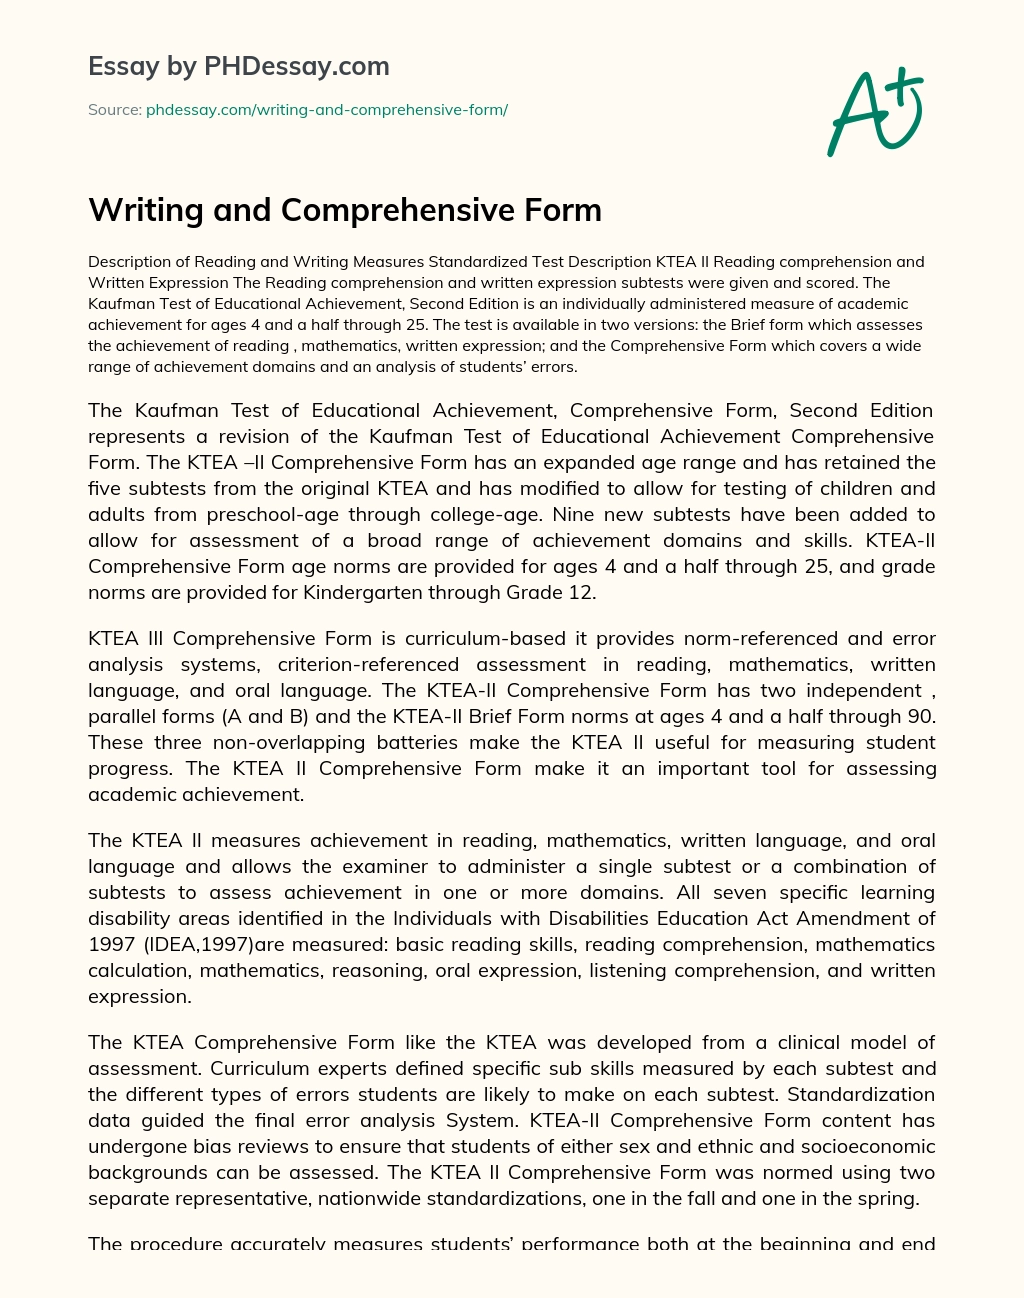 Writing and Comprehensive Form essay